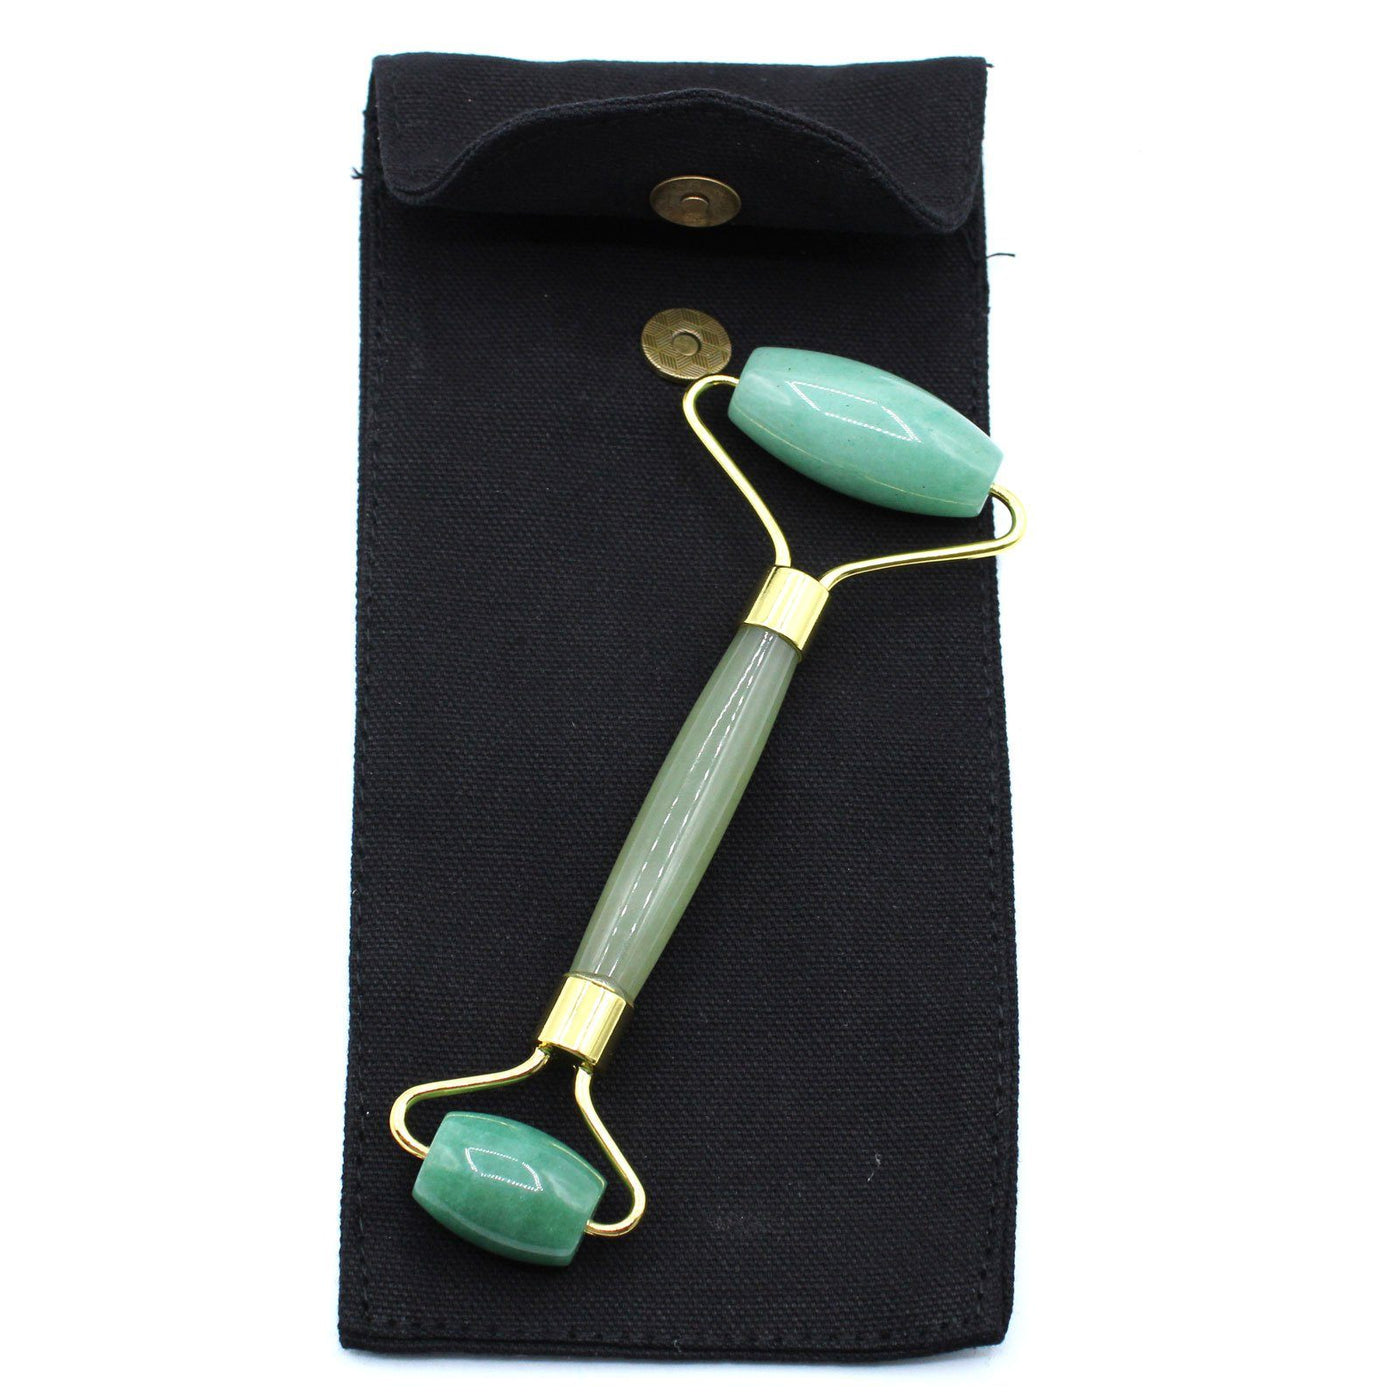 Natural Gemstone Jade Face Roller In Cosmetic Pouch.